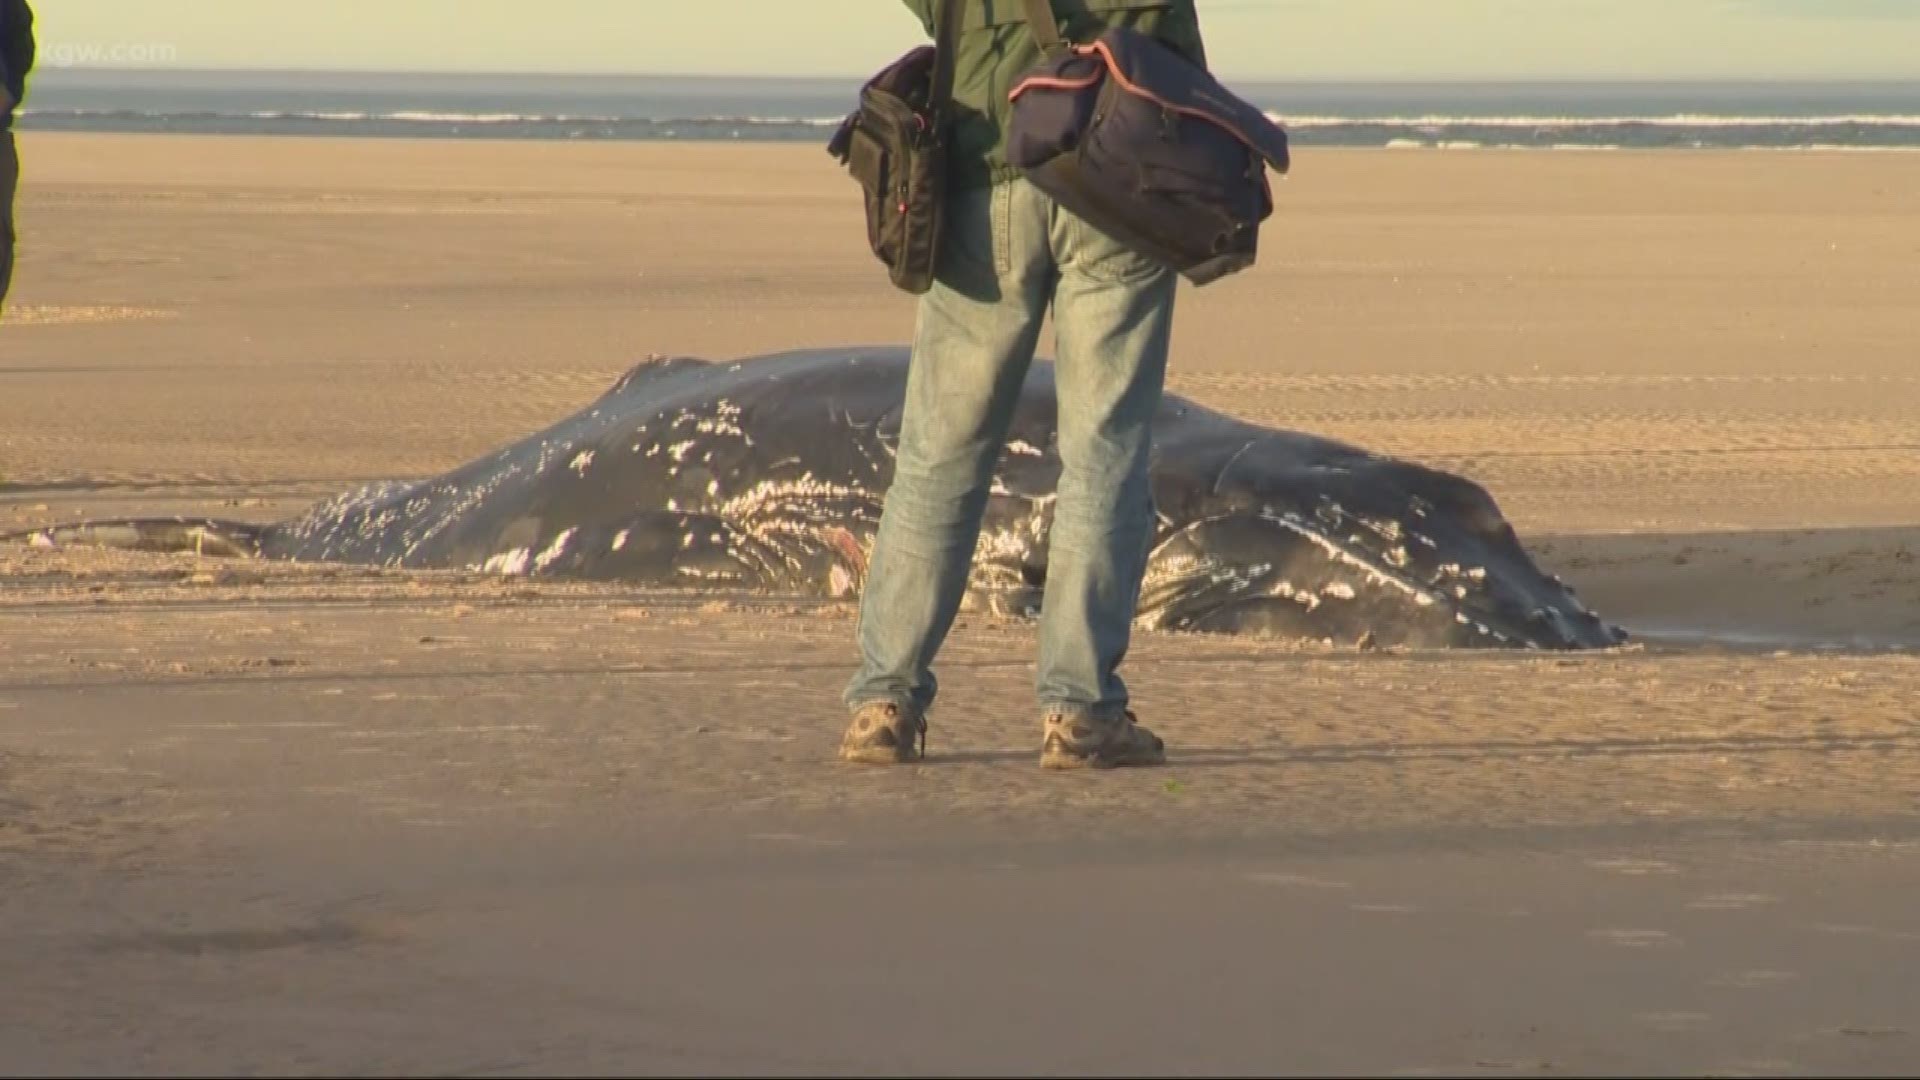 A juvenile humpback whale that stranded itself on the beach in Waldport has been euthanized.